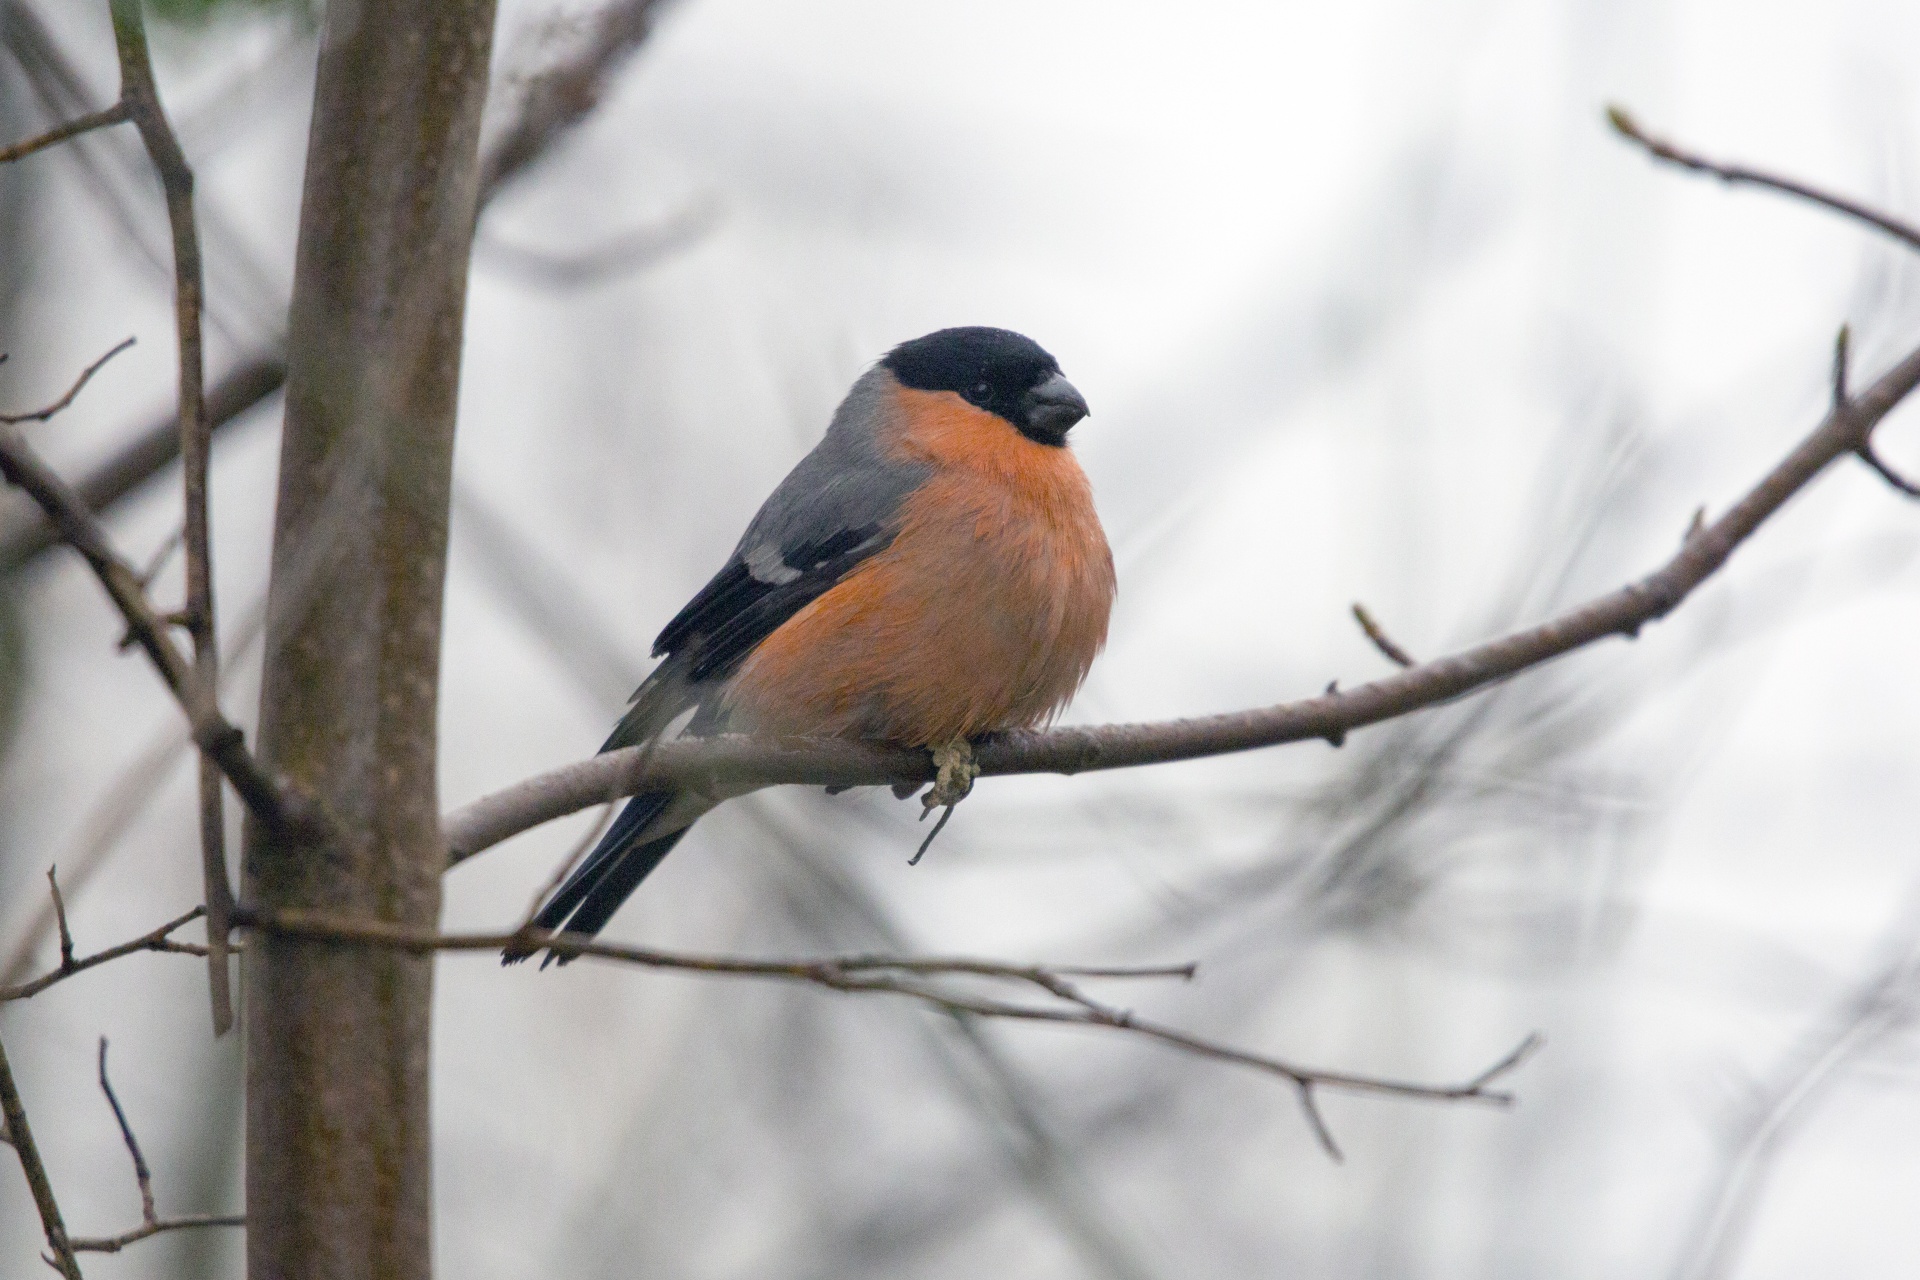 The male bullfinch is unmistakable with his bright pinkish-red breast and cheeks, grey back, black cap and tail, and bright white rump. The flash of the rump in flight and piping whistled call are usually the first signs of bullfinches being present.